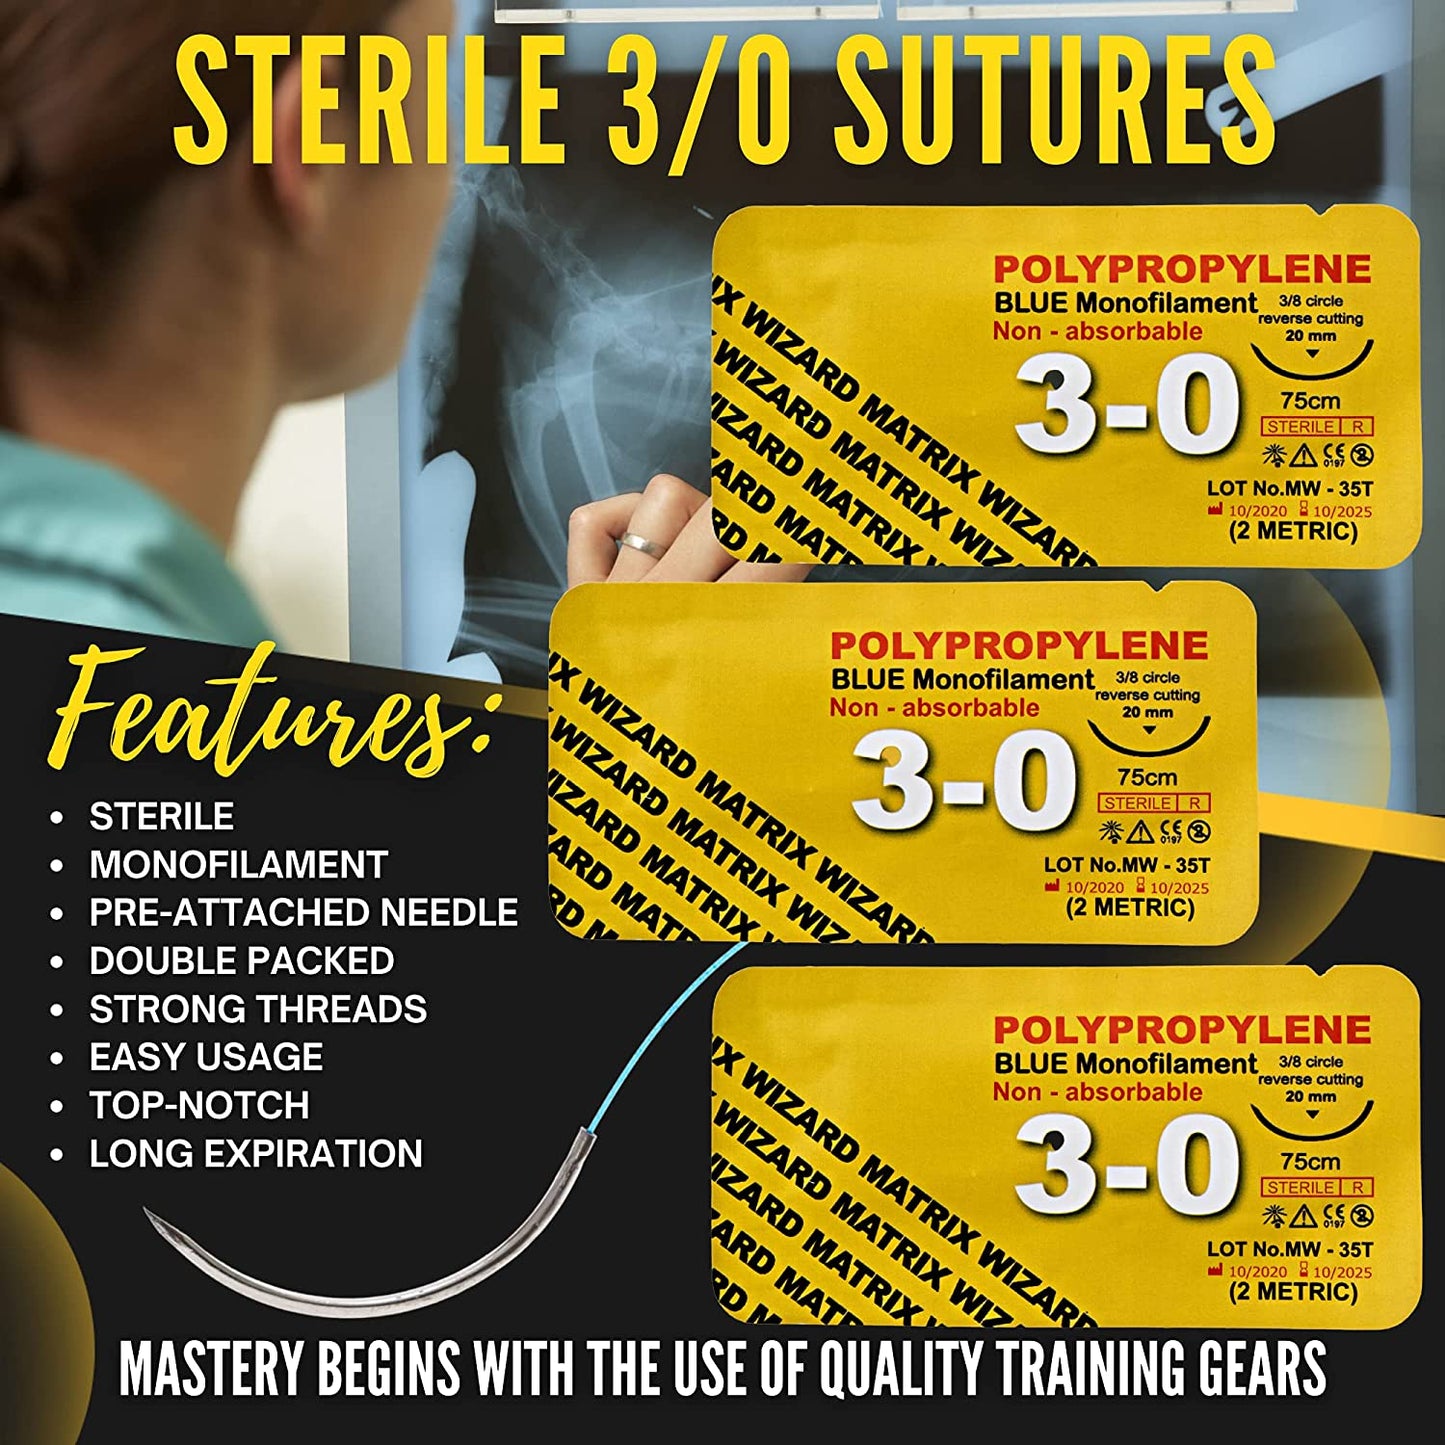 Sterile Suture Thread with Needle Plus Disposable Preloaded 55 Wire Stapler Tool - Medics, EMT, Nursing First Aid Surgical Suture Practice Kit; Wound Training Set; Vet Use